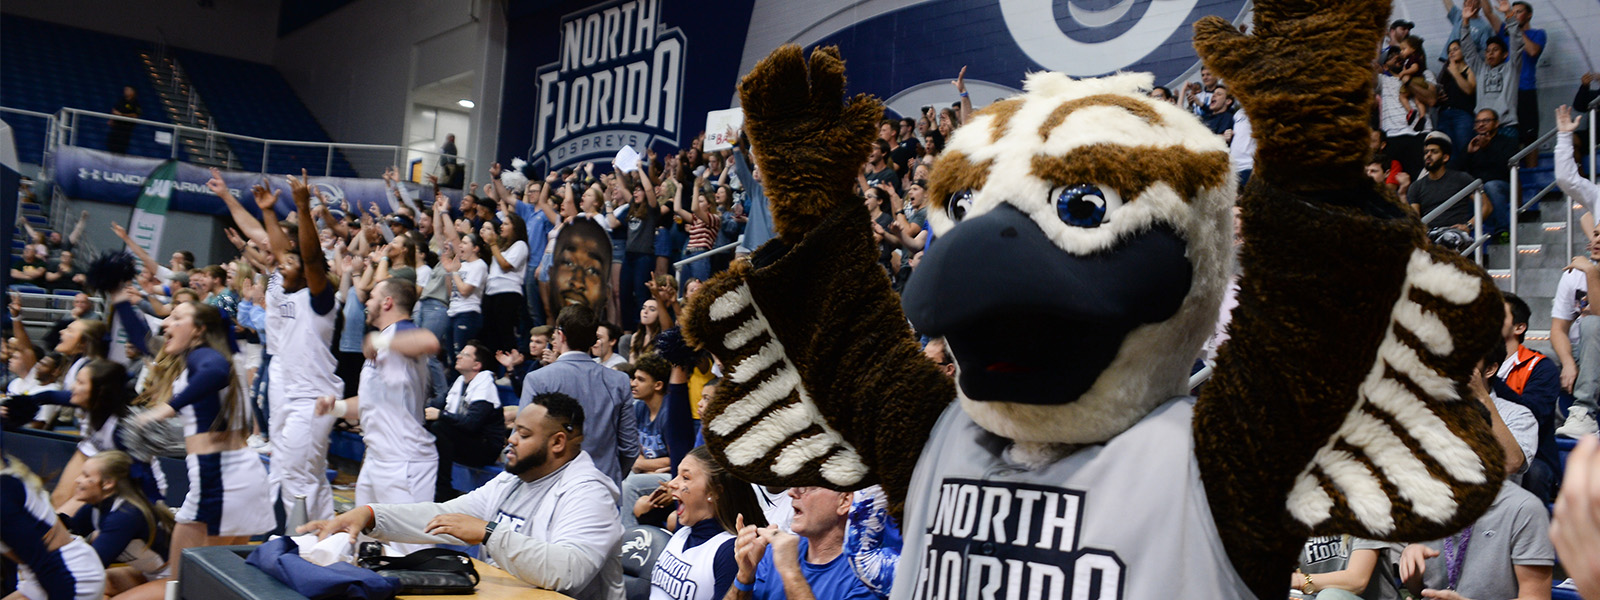 Ozzie and fans at a UNF basketball game cheering together